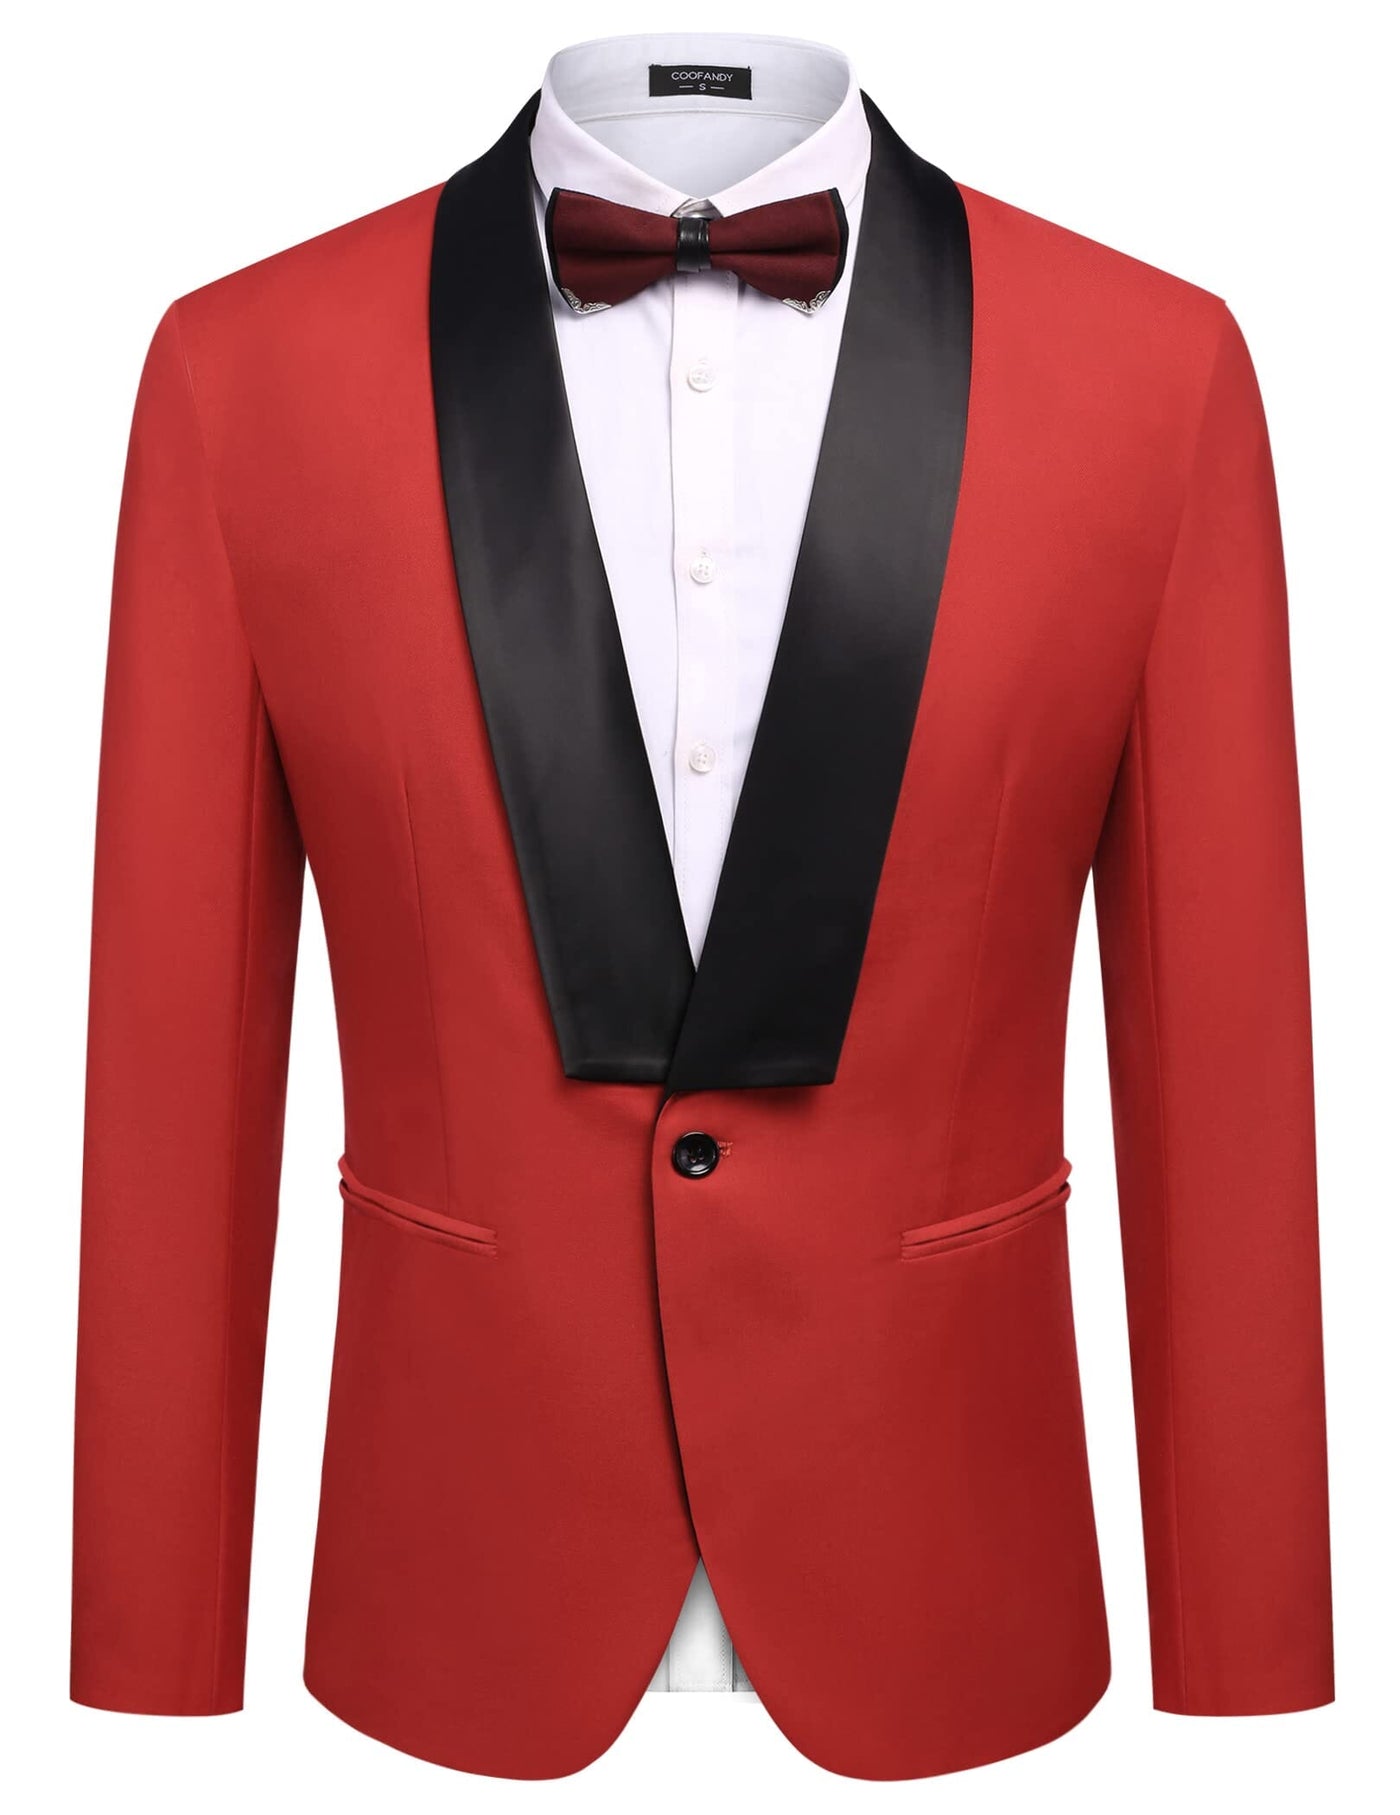 Slim Fit Suits One Button Shawl Lapel Tuxedo (US Only) Suit Set coofandystore Red S 